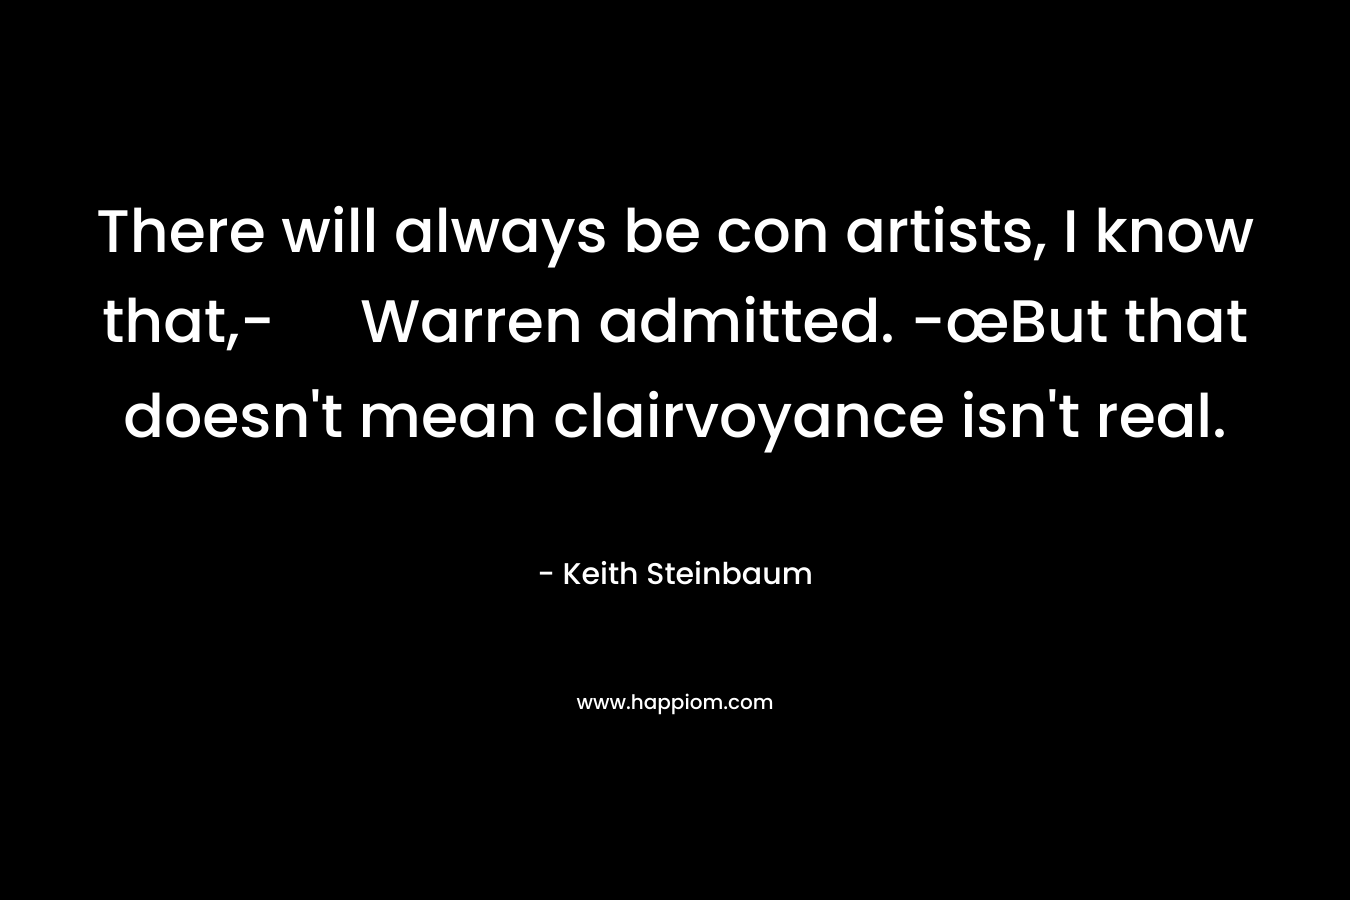 There will always be con artists, I know that,- Warren admitted. -œBut that doesn't mean clairvoyance isn't real.